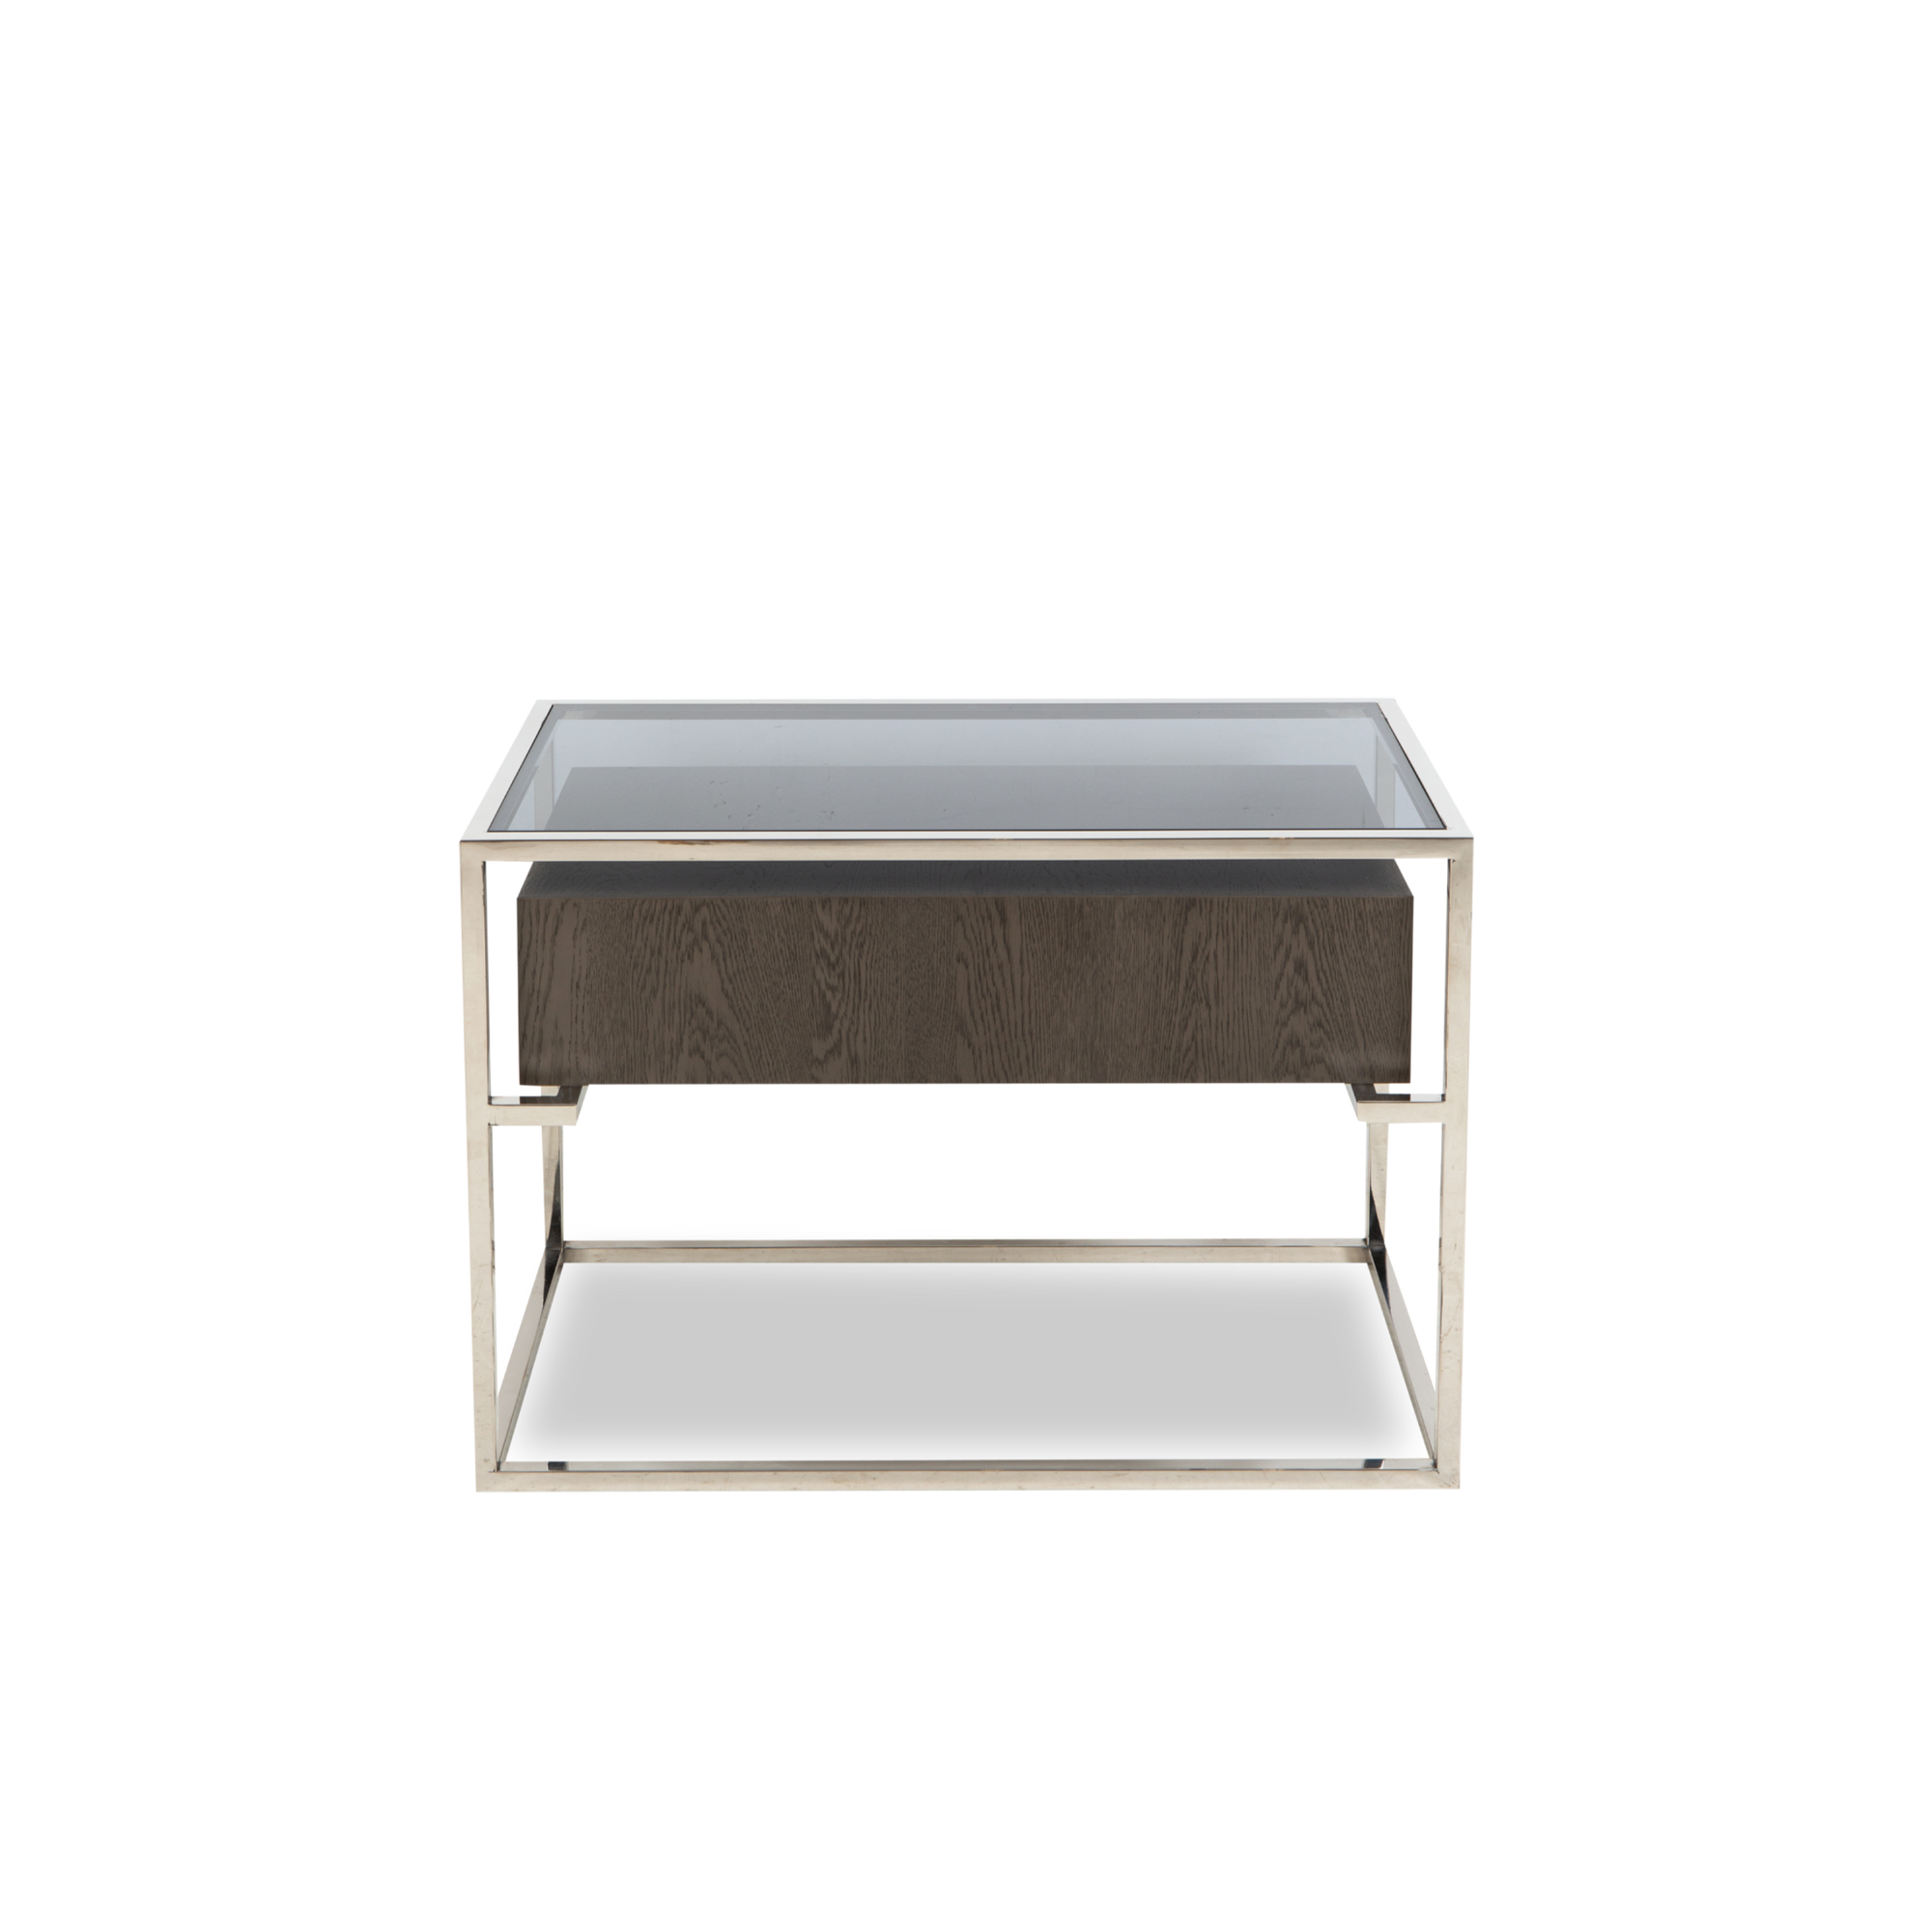 Sleek design meets mixed materials to form the Wheeler End Table.